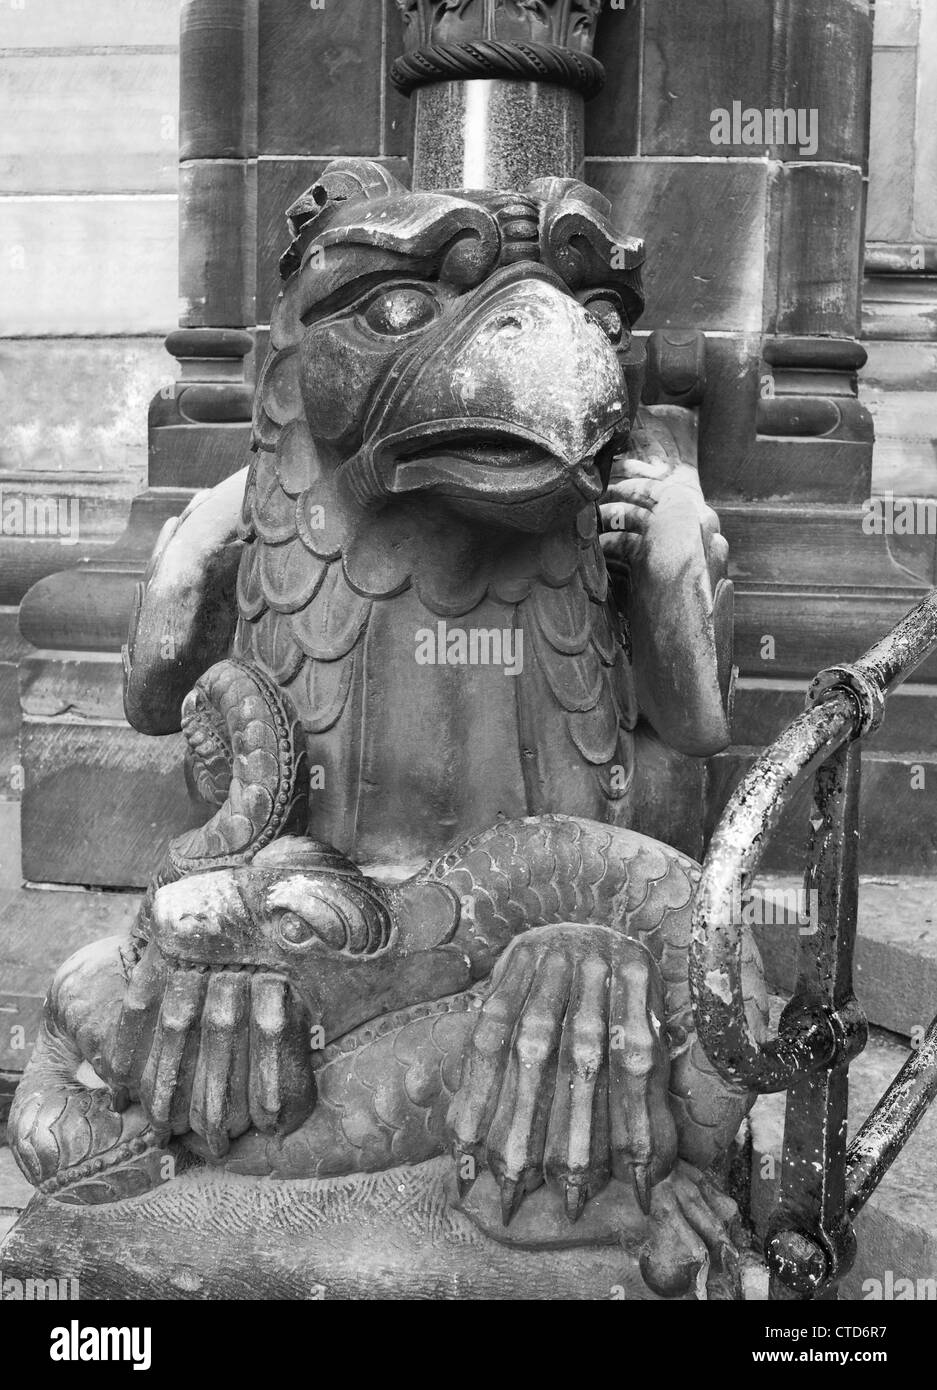 Gargoyle at the gate of Bremen's cathedral Stock Photo